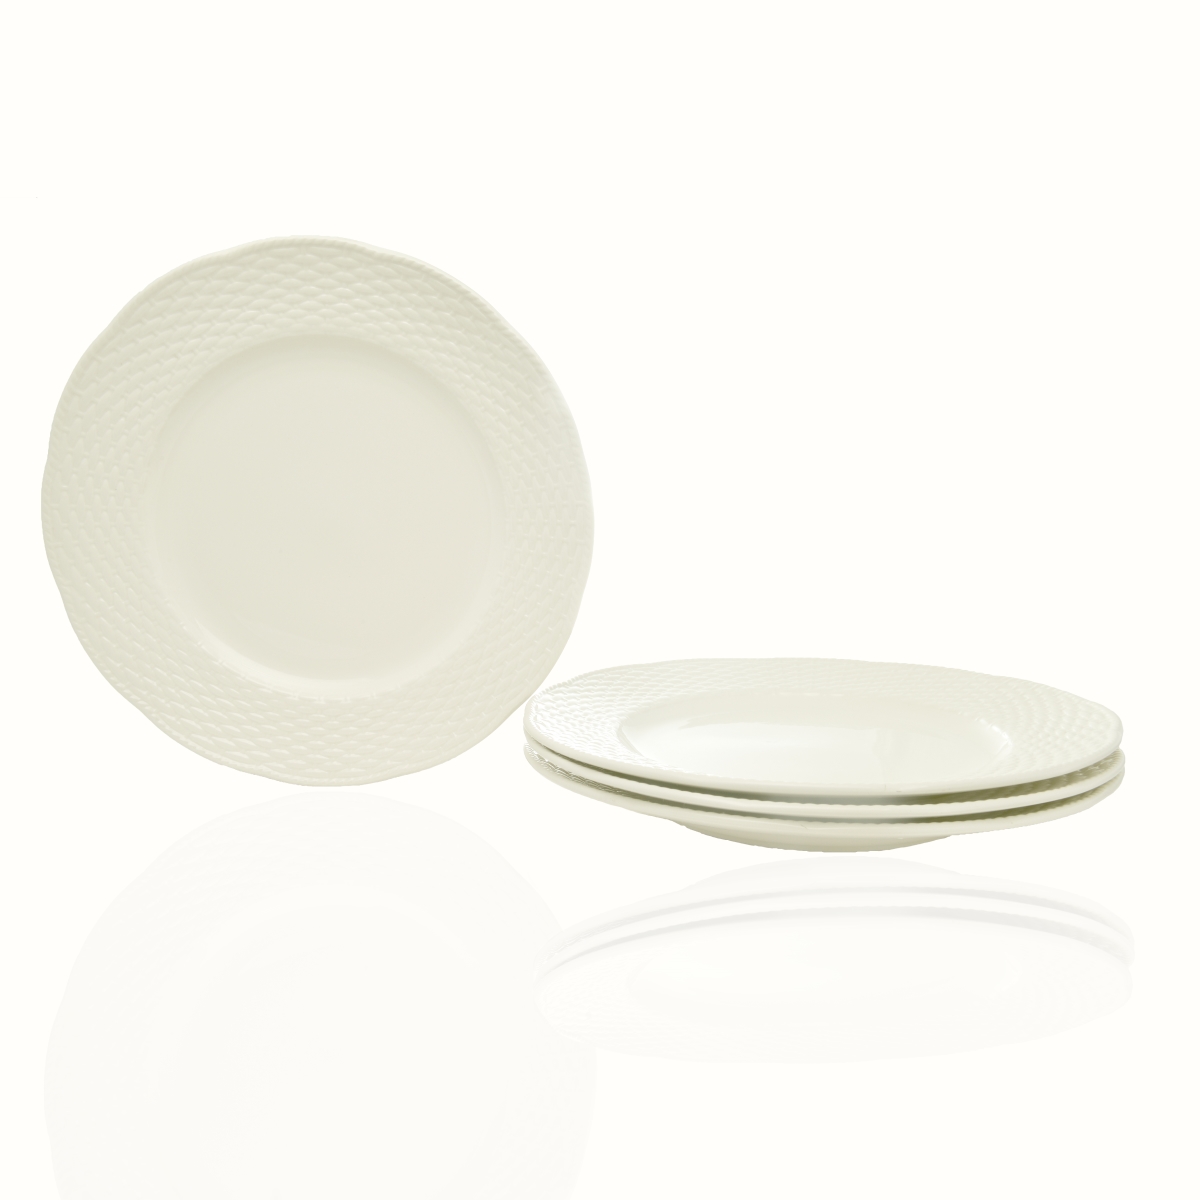 Picture of Red Vanilla FC900-402 8.5 in. Nantucket White Salad Plates - Set of 4